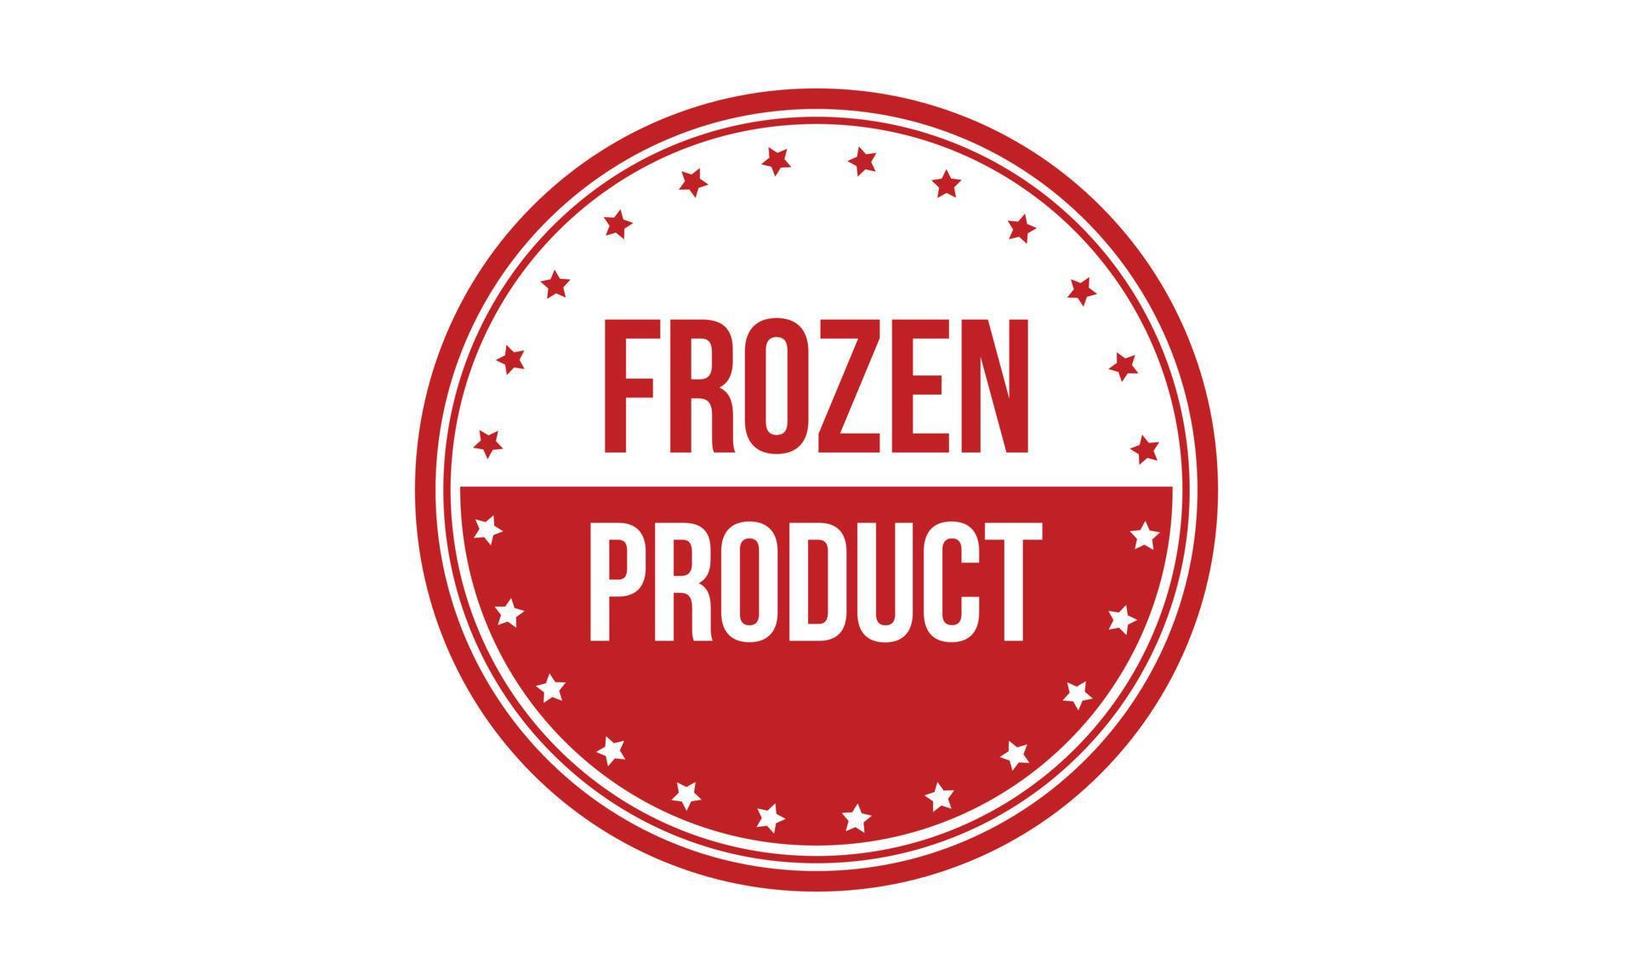 Frozen Product Rubber Stamp. Red Frozen Product Rubber Grunge Stamp Seal Vector Illustration - Vector